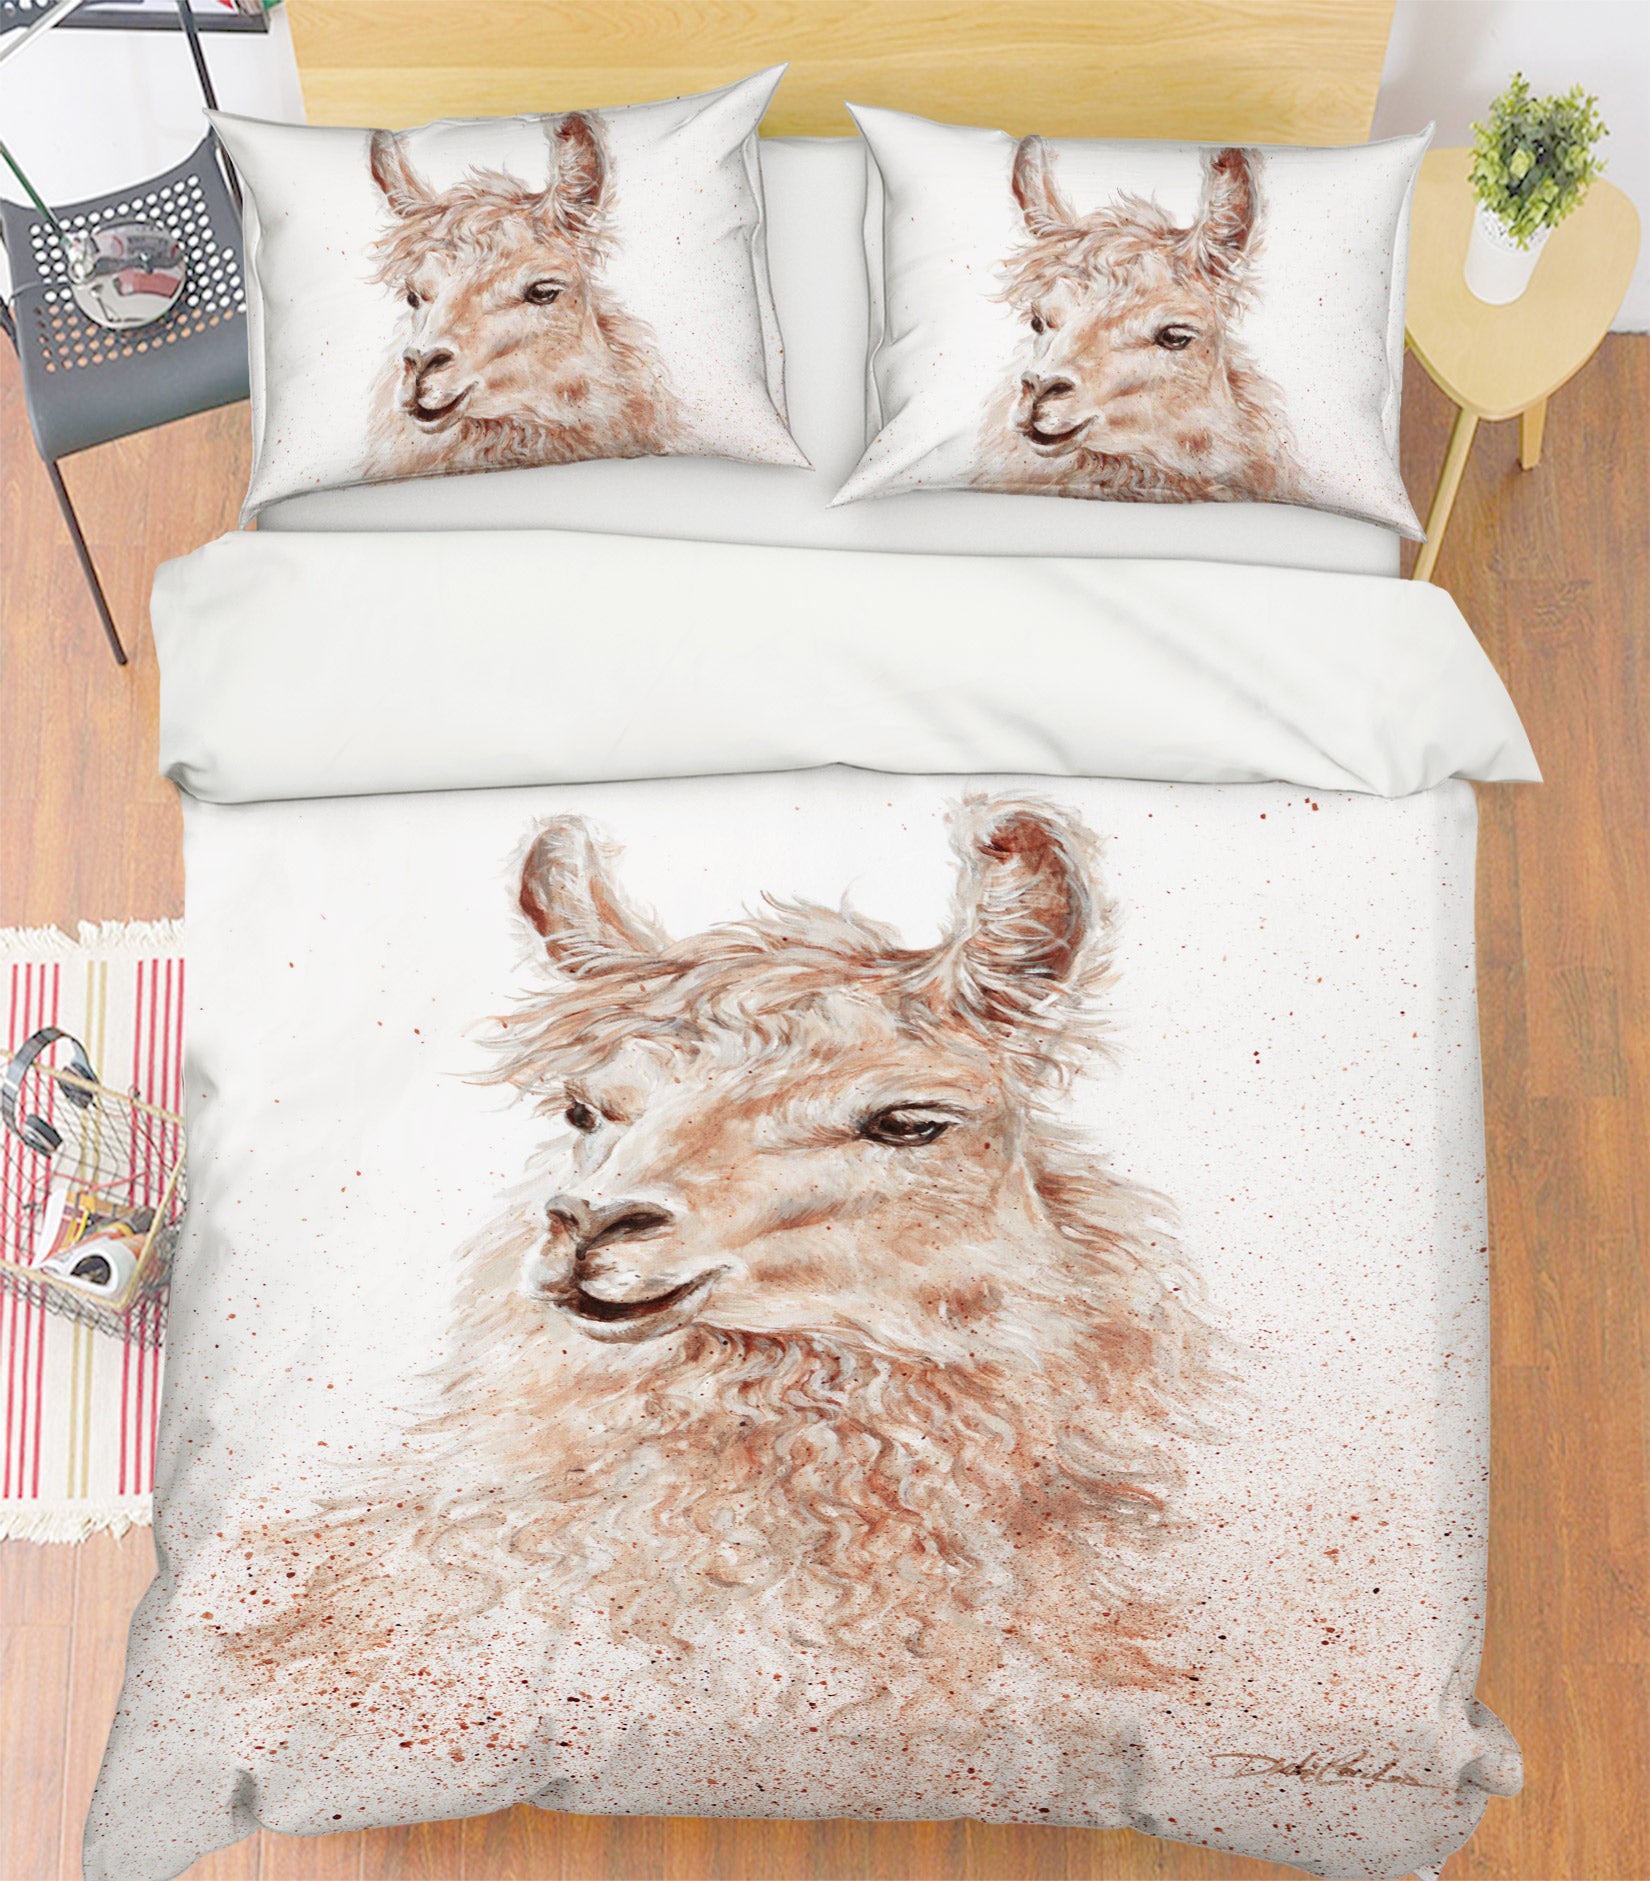 3D Sheep 2115 Debi Coules Bedding Bed Pillowcases Quilt